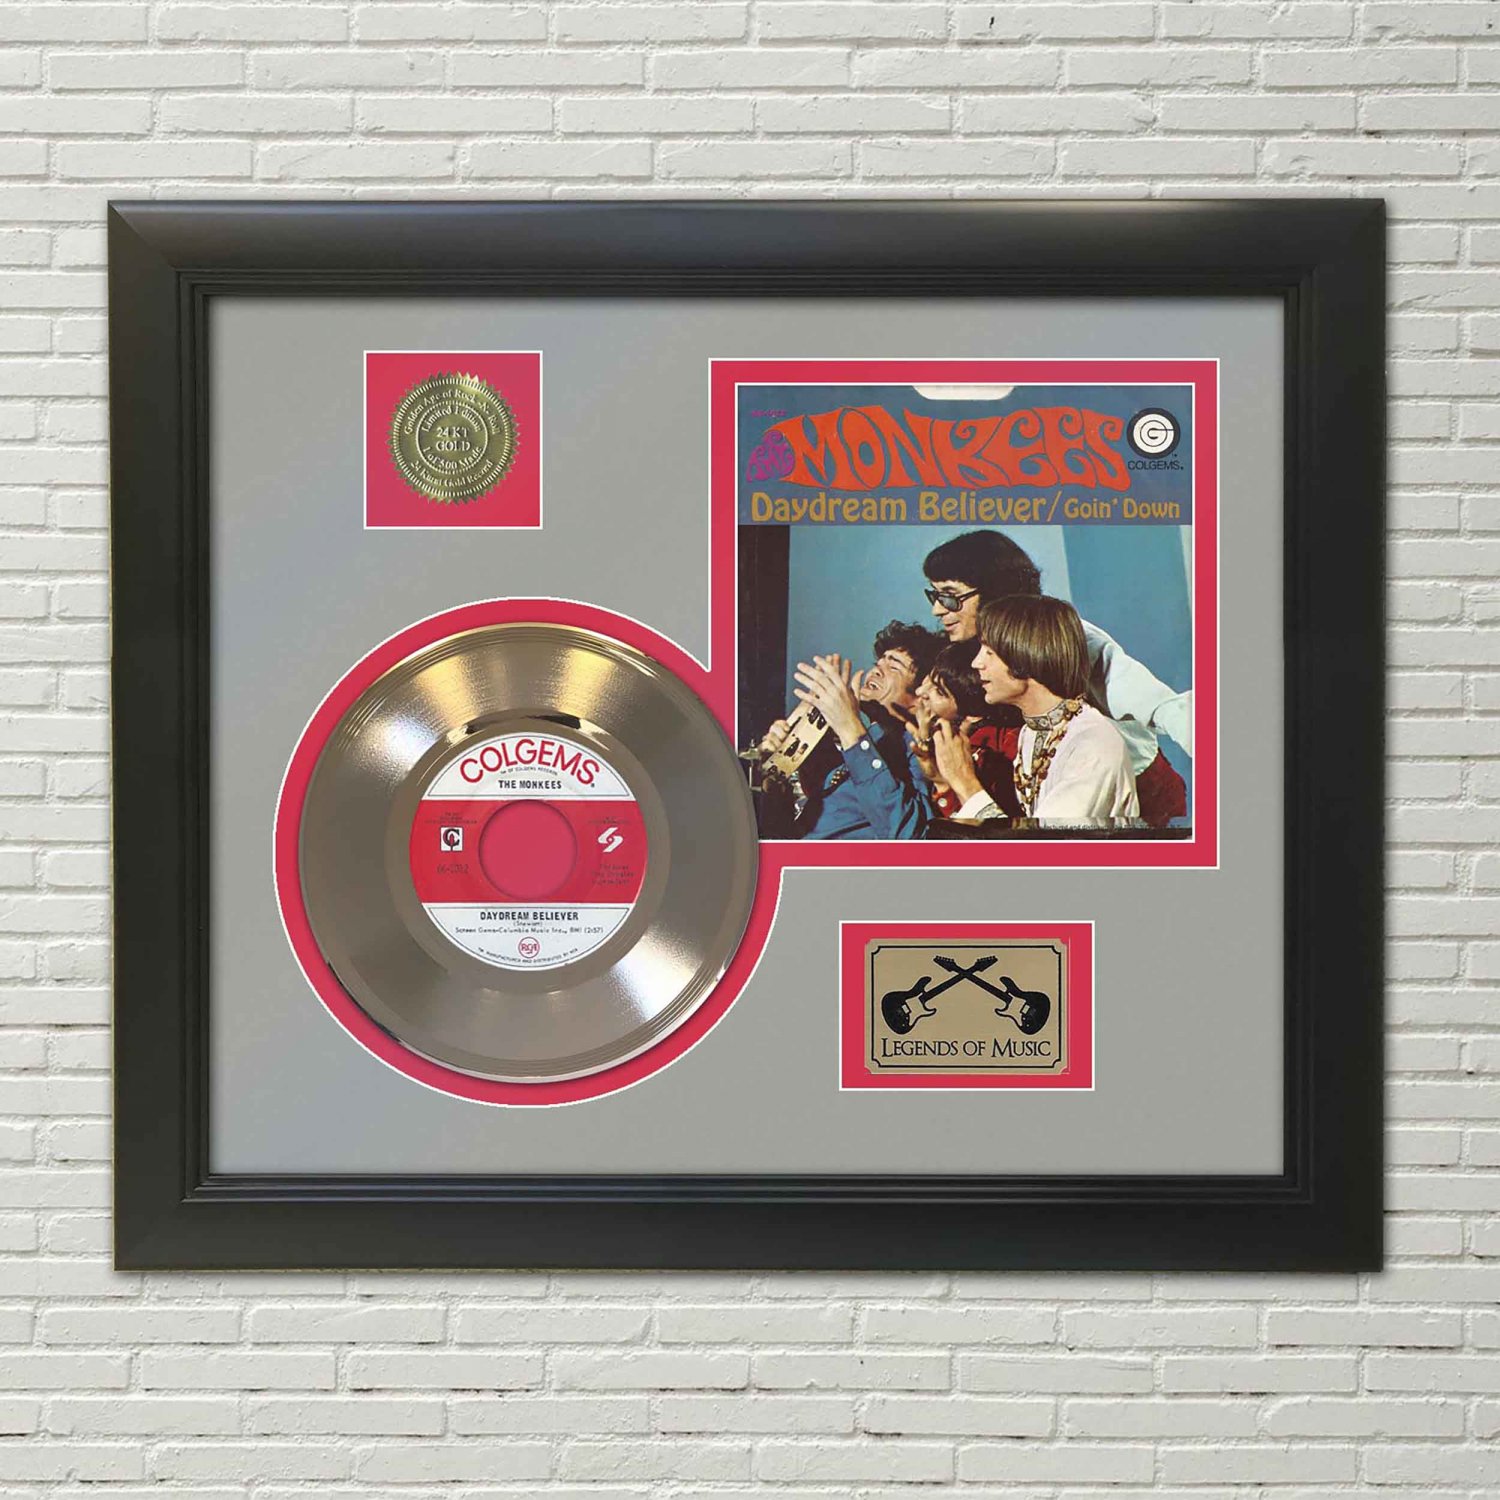 MONKEES "Daydream Believer"  Framed Picture Sleeve Gold 45 Record Display